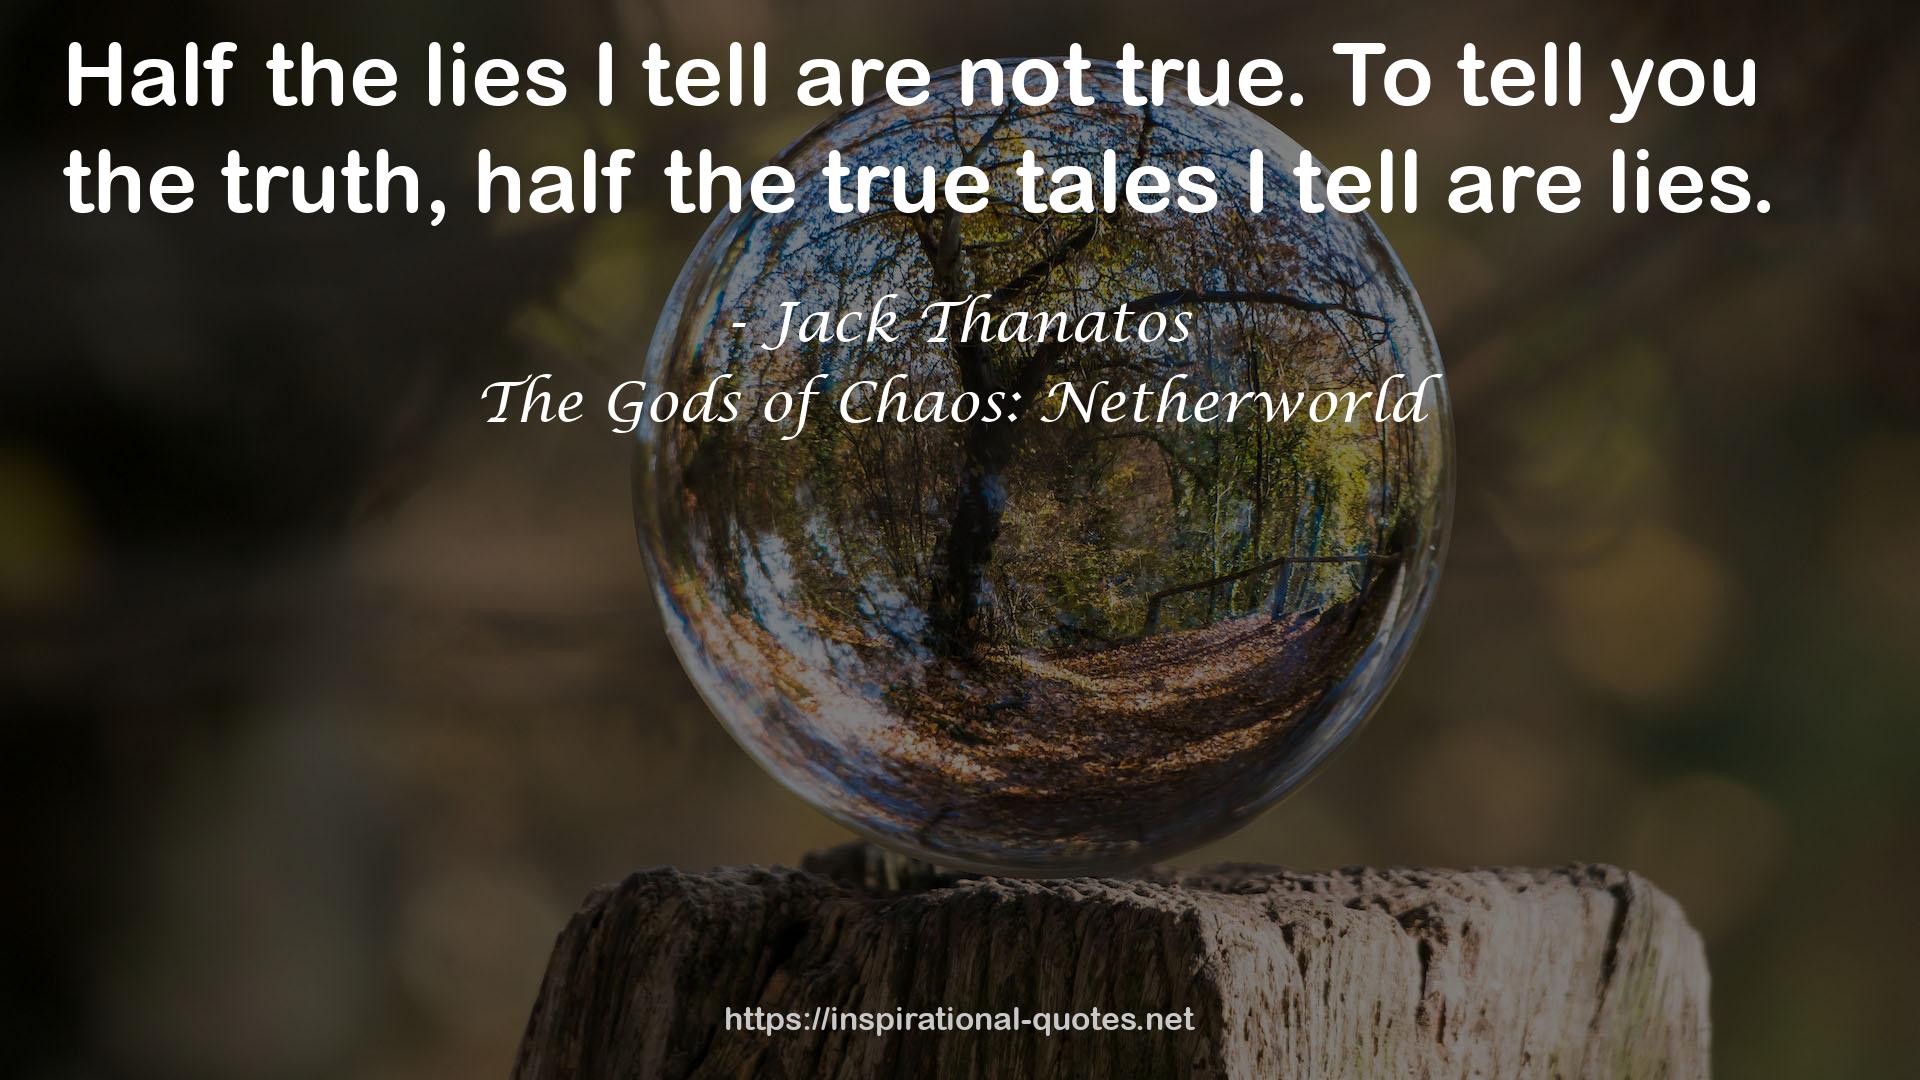 The Gods of Chaos: Netherworld QUOTES